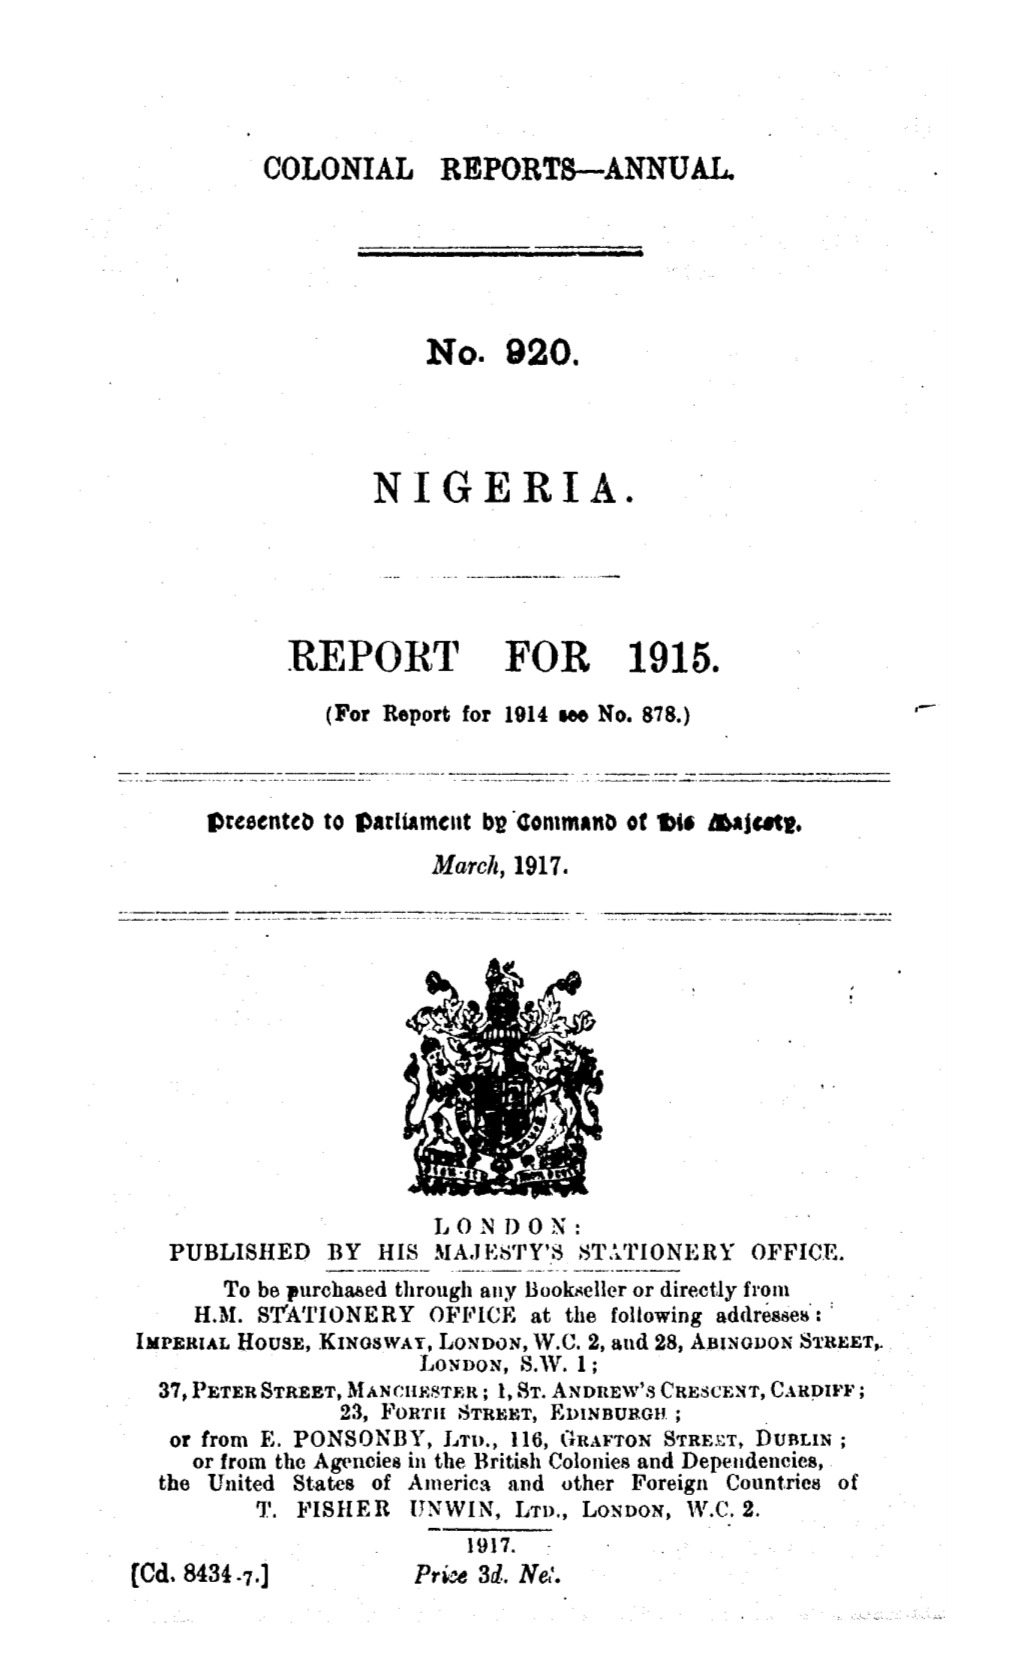 Annual Report of the Colonies, Nigeria, 1915